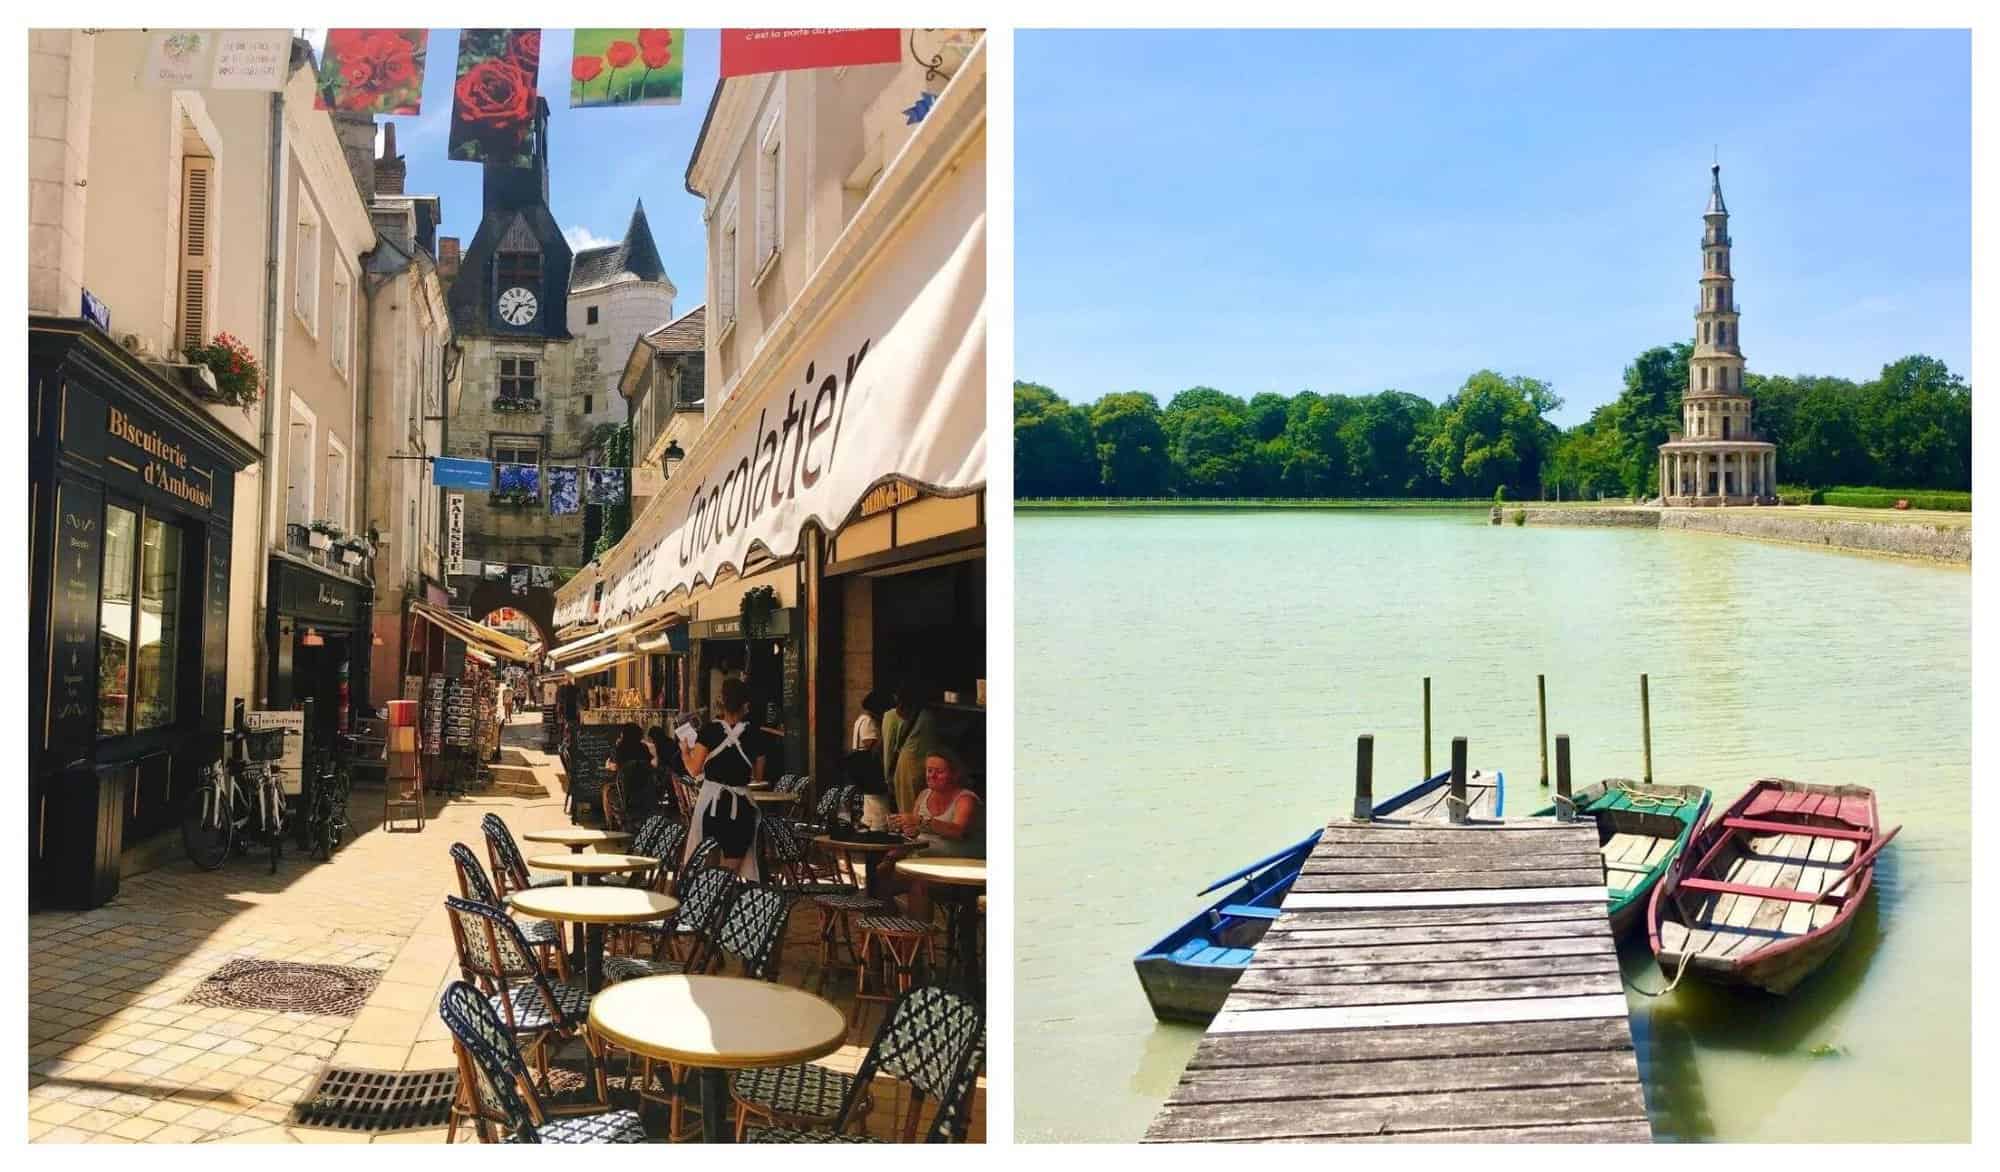 Left: Sun is shining on a busy street in Amboise. Right: Three boats are on a lake in Amboise.